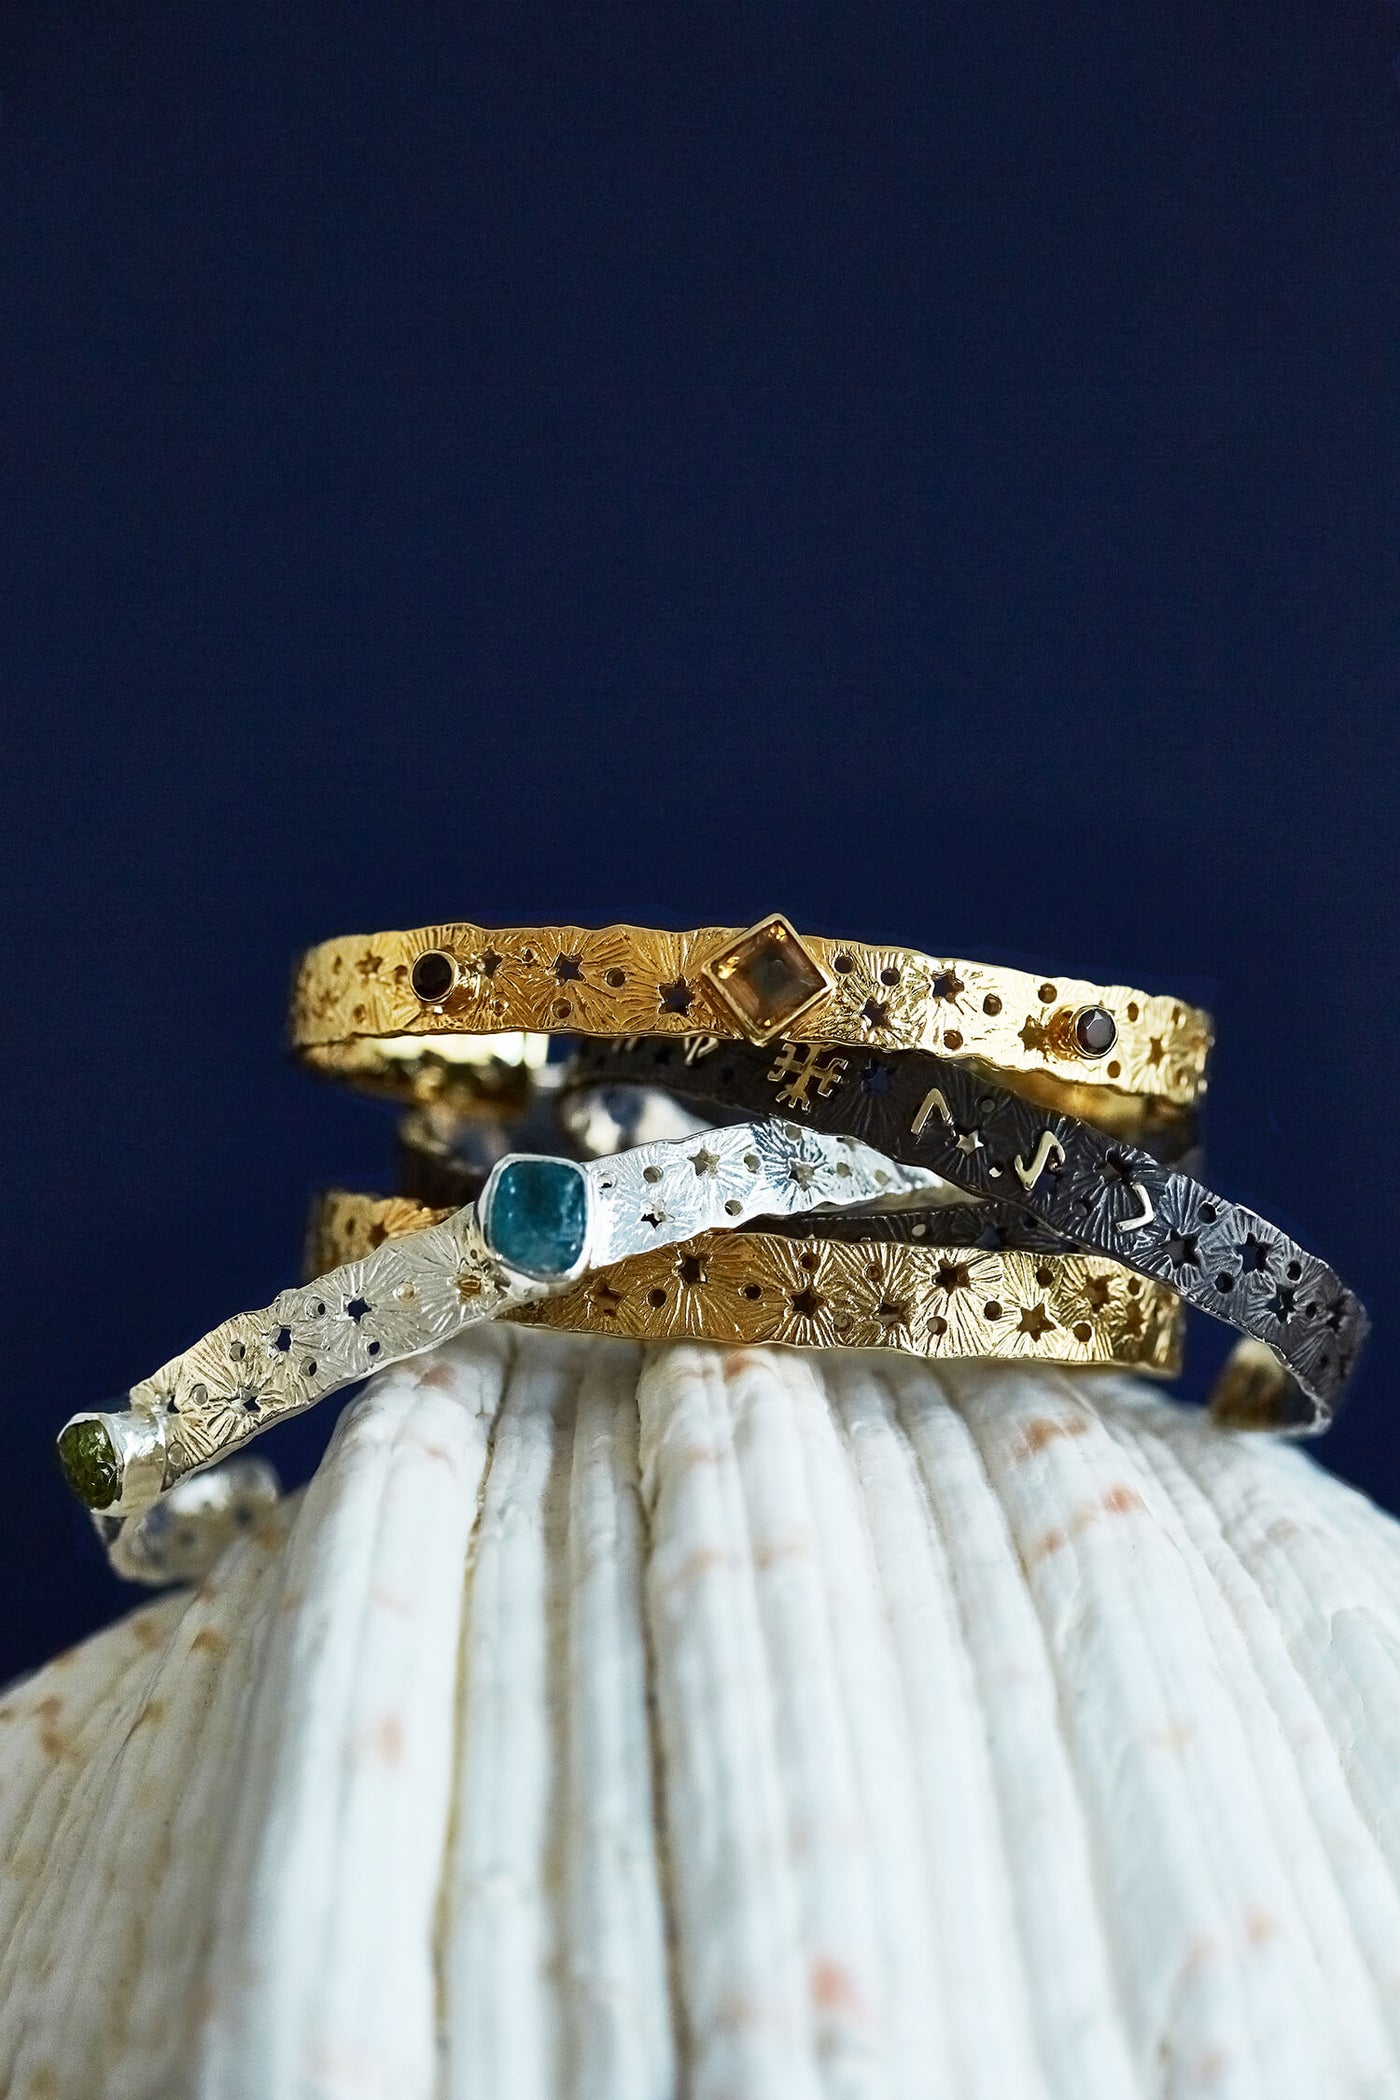 3 rough stones lace cuff. Silver, gold-plated